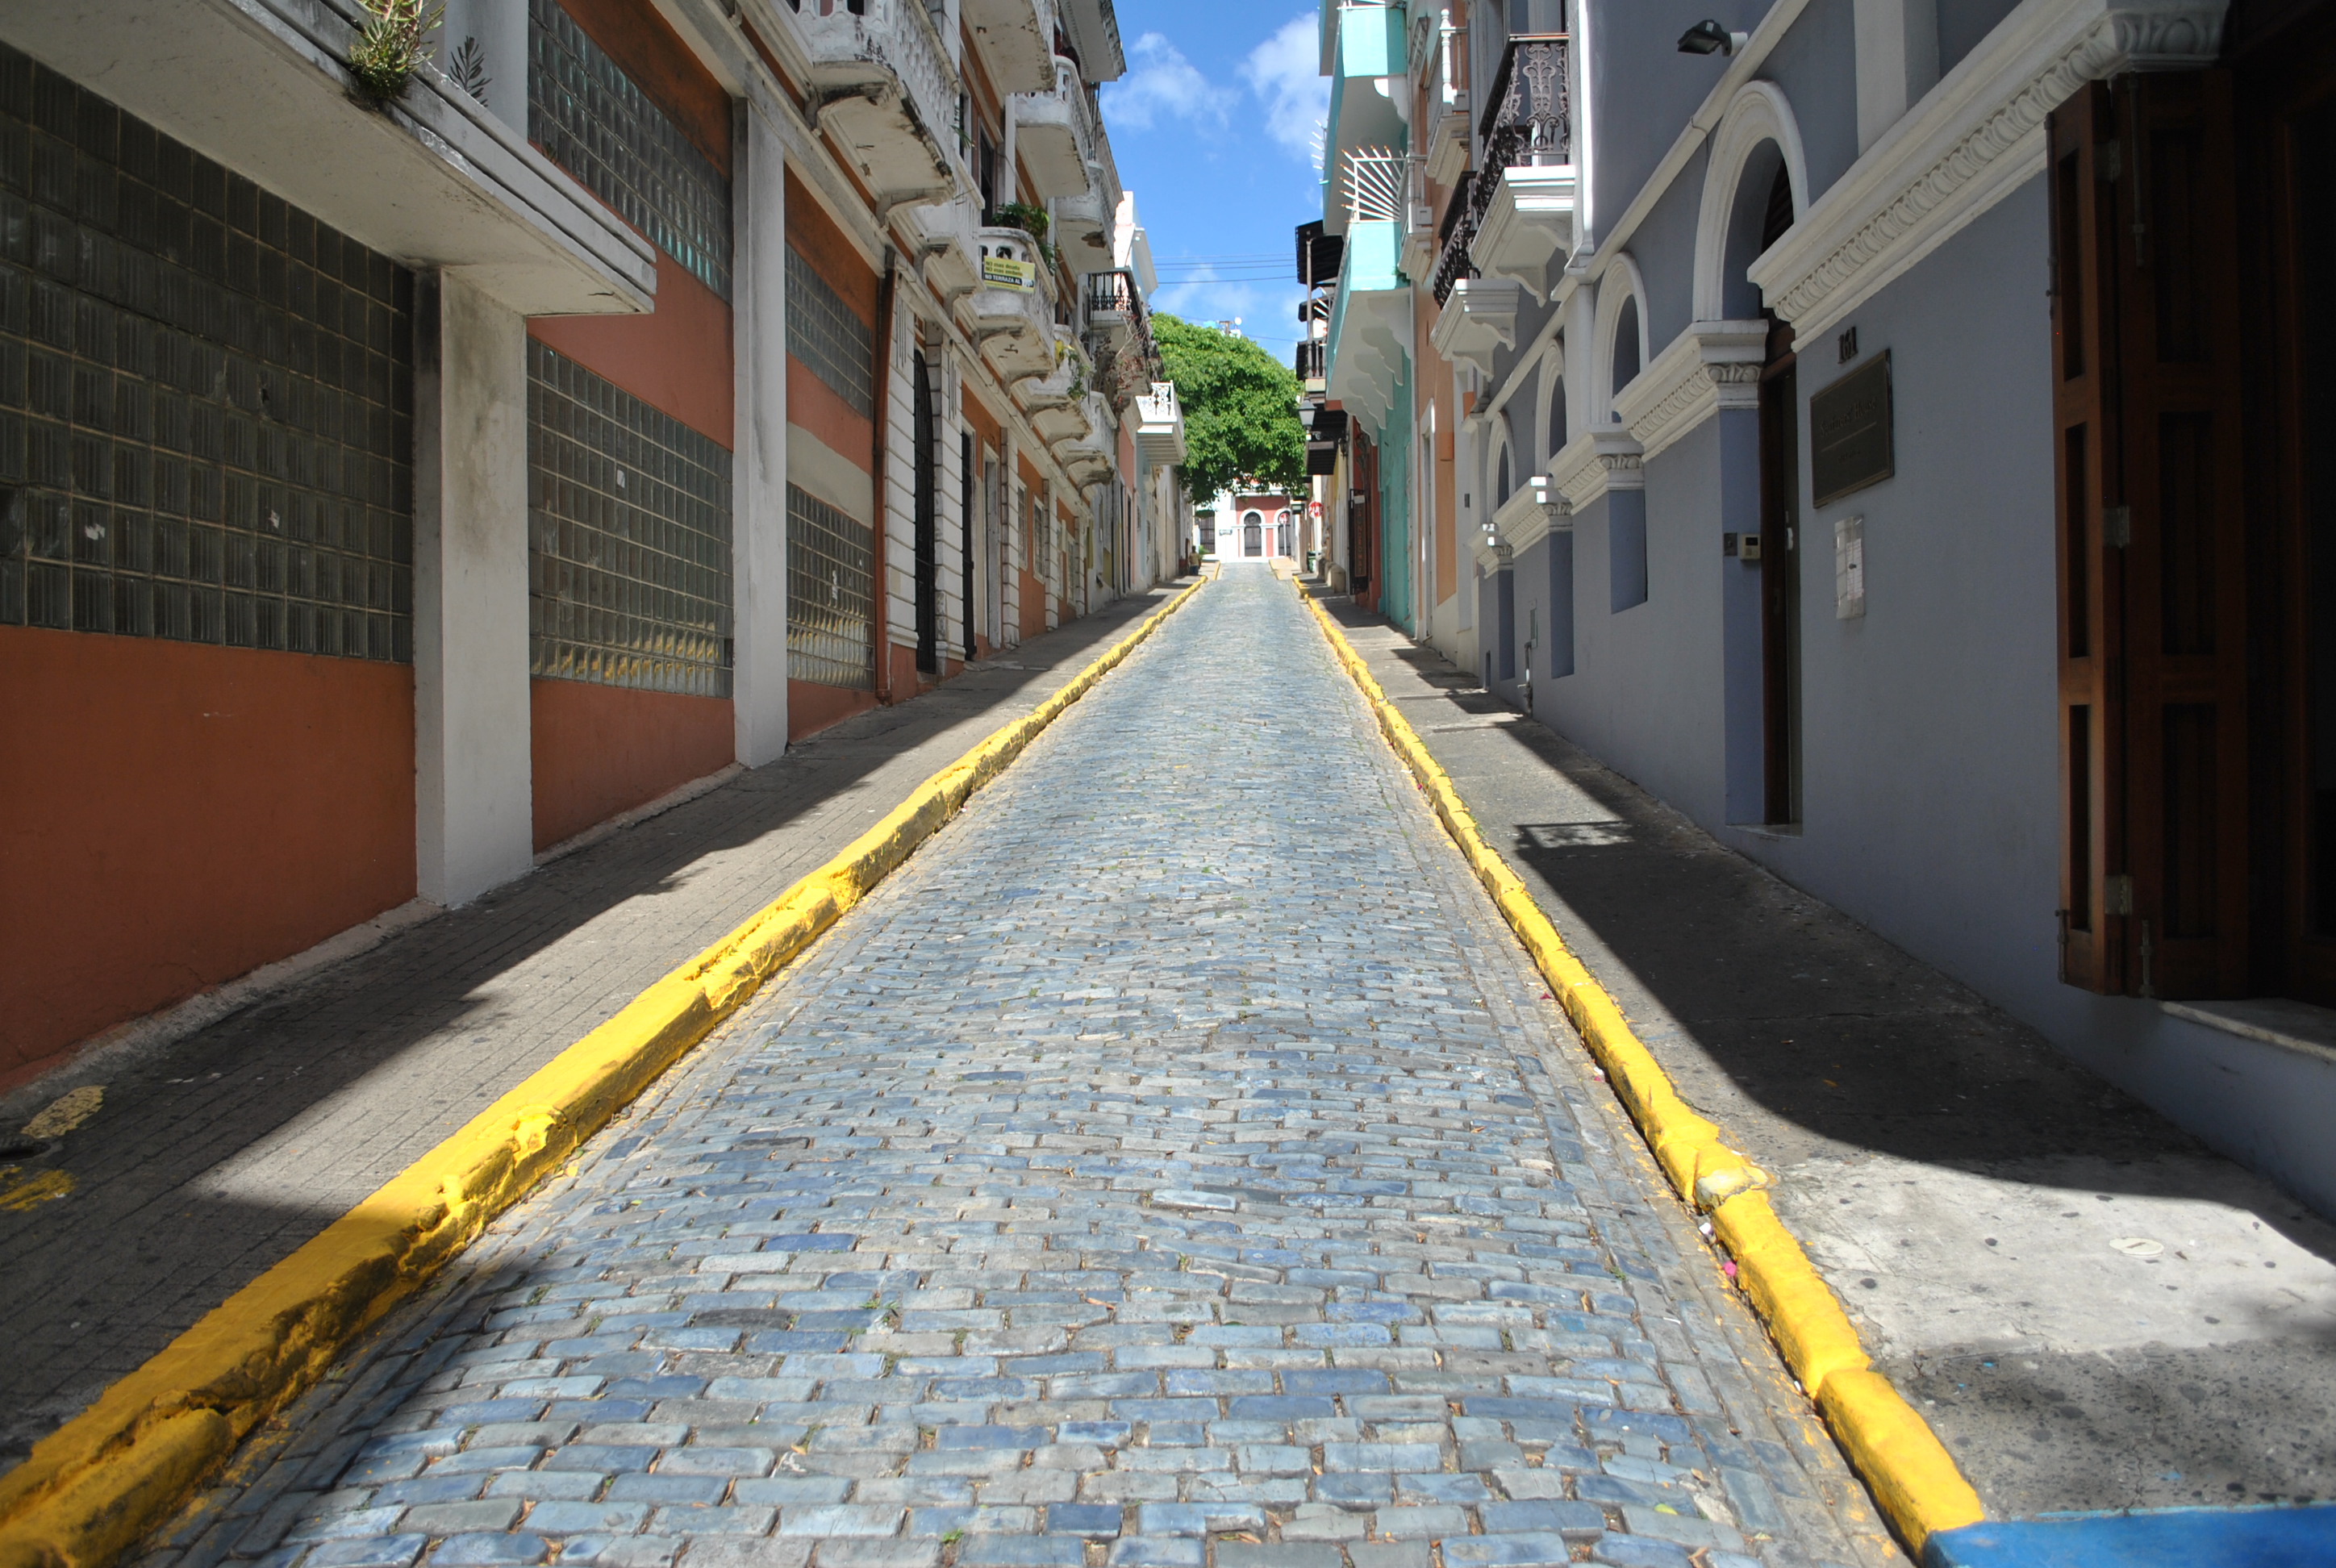 Brick paver street in Puerto Rico (I just love this)